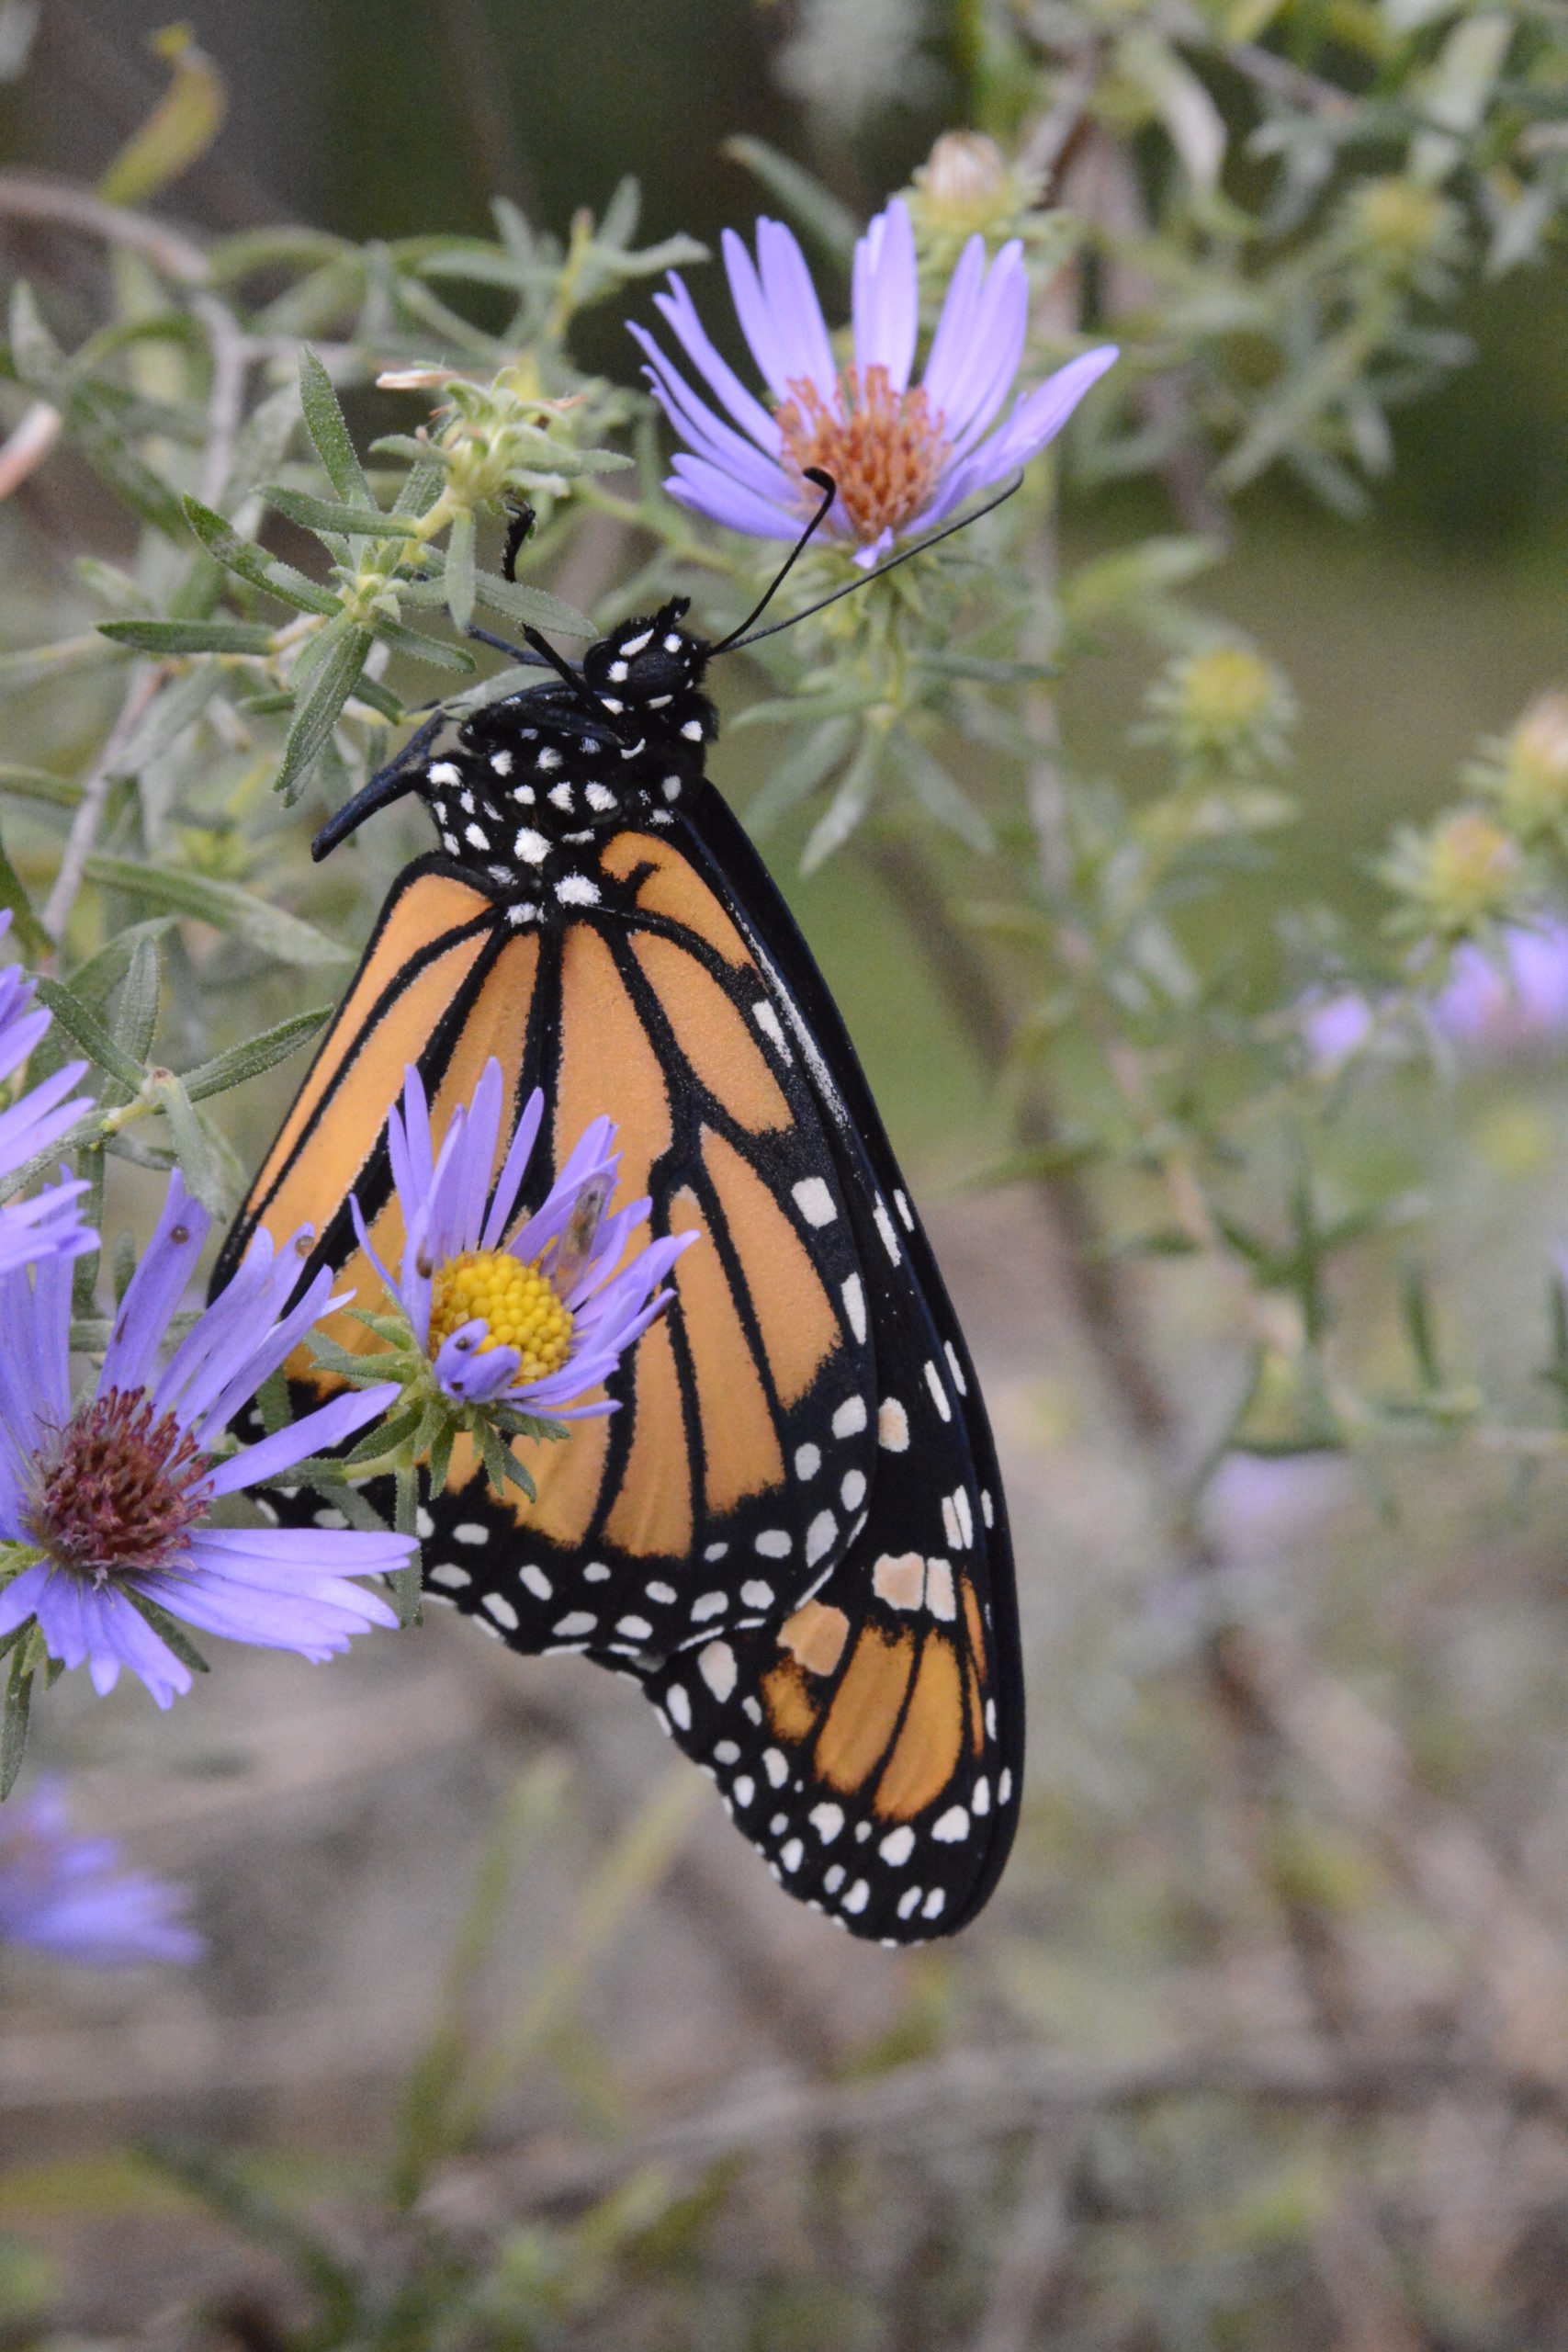 Close up of a monarch butterfly resting on an aster flower with purple petals